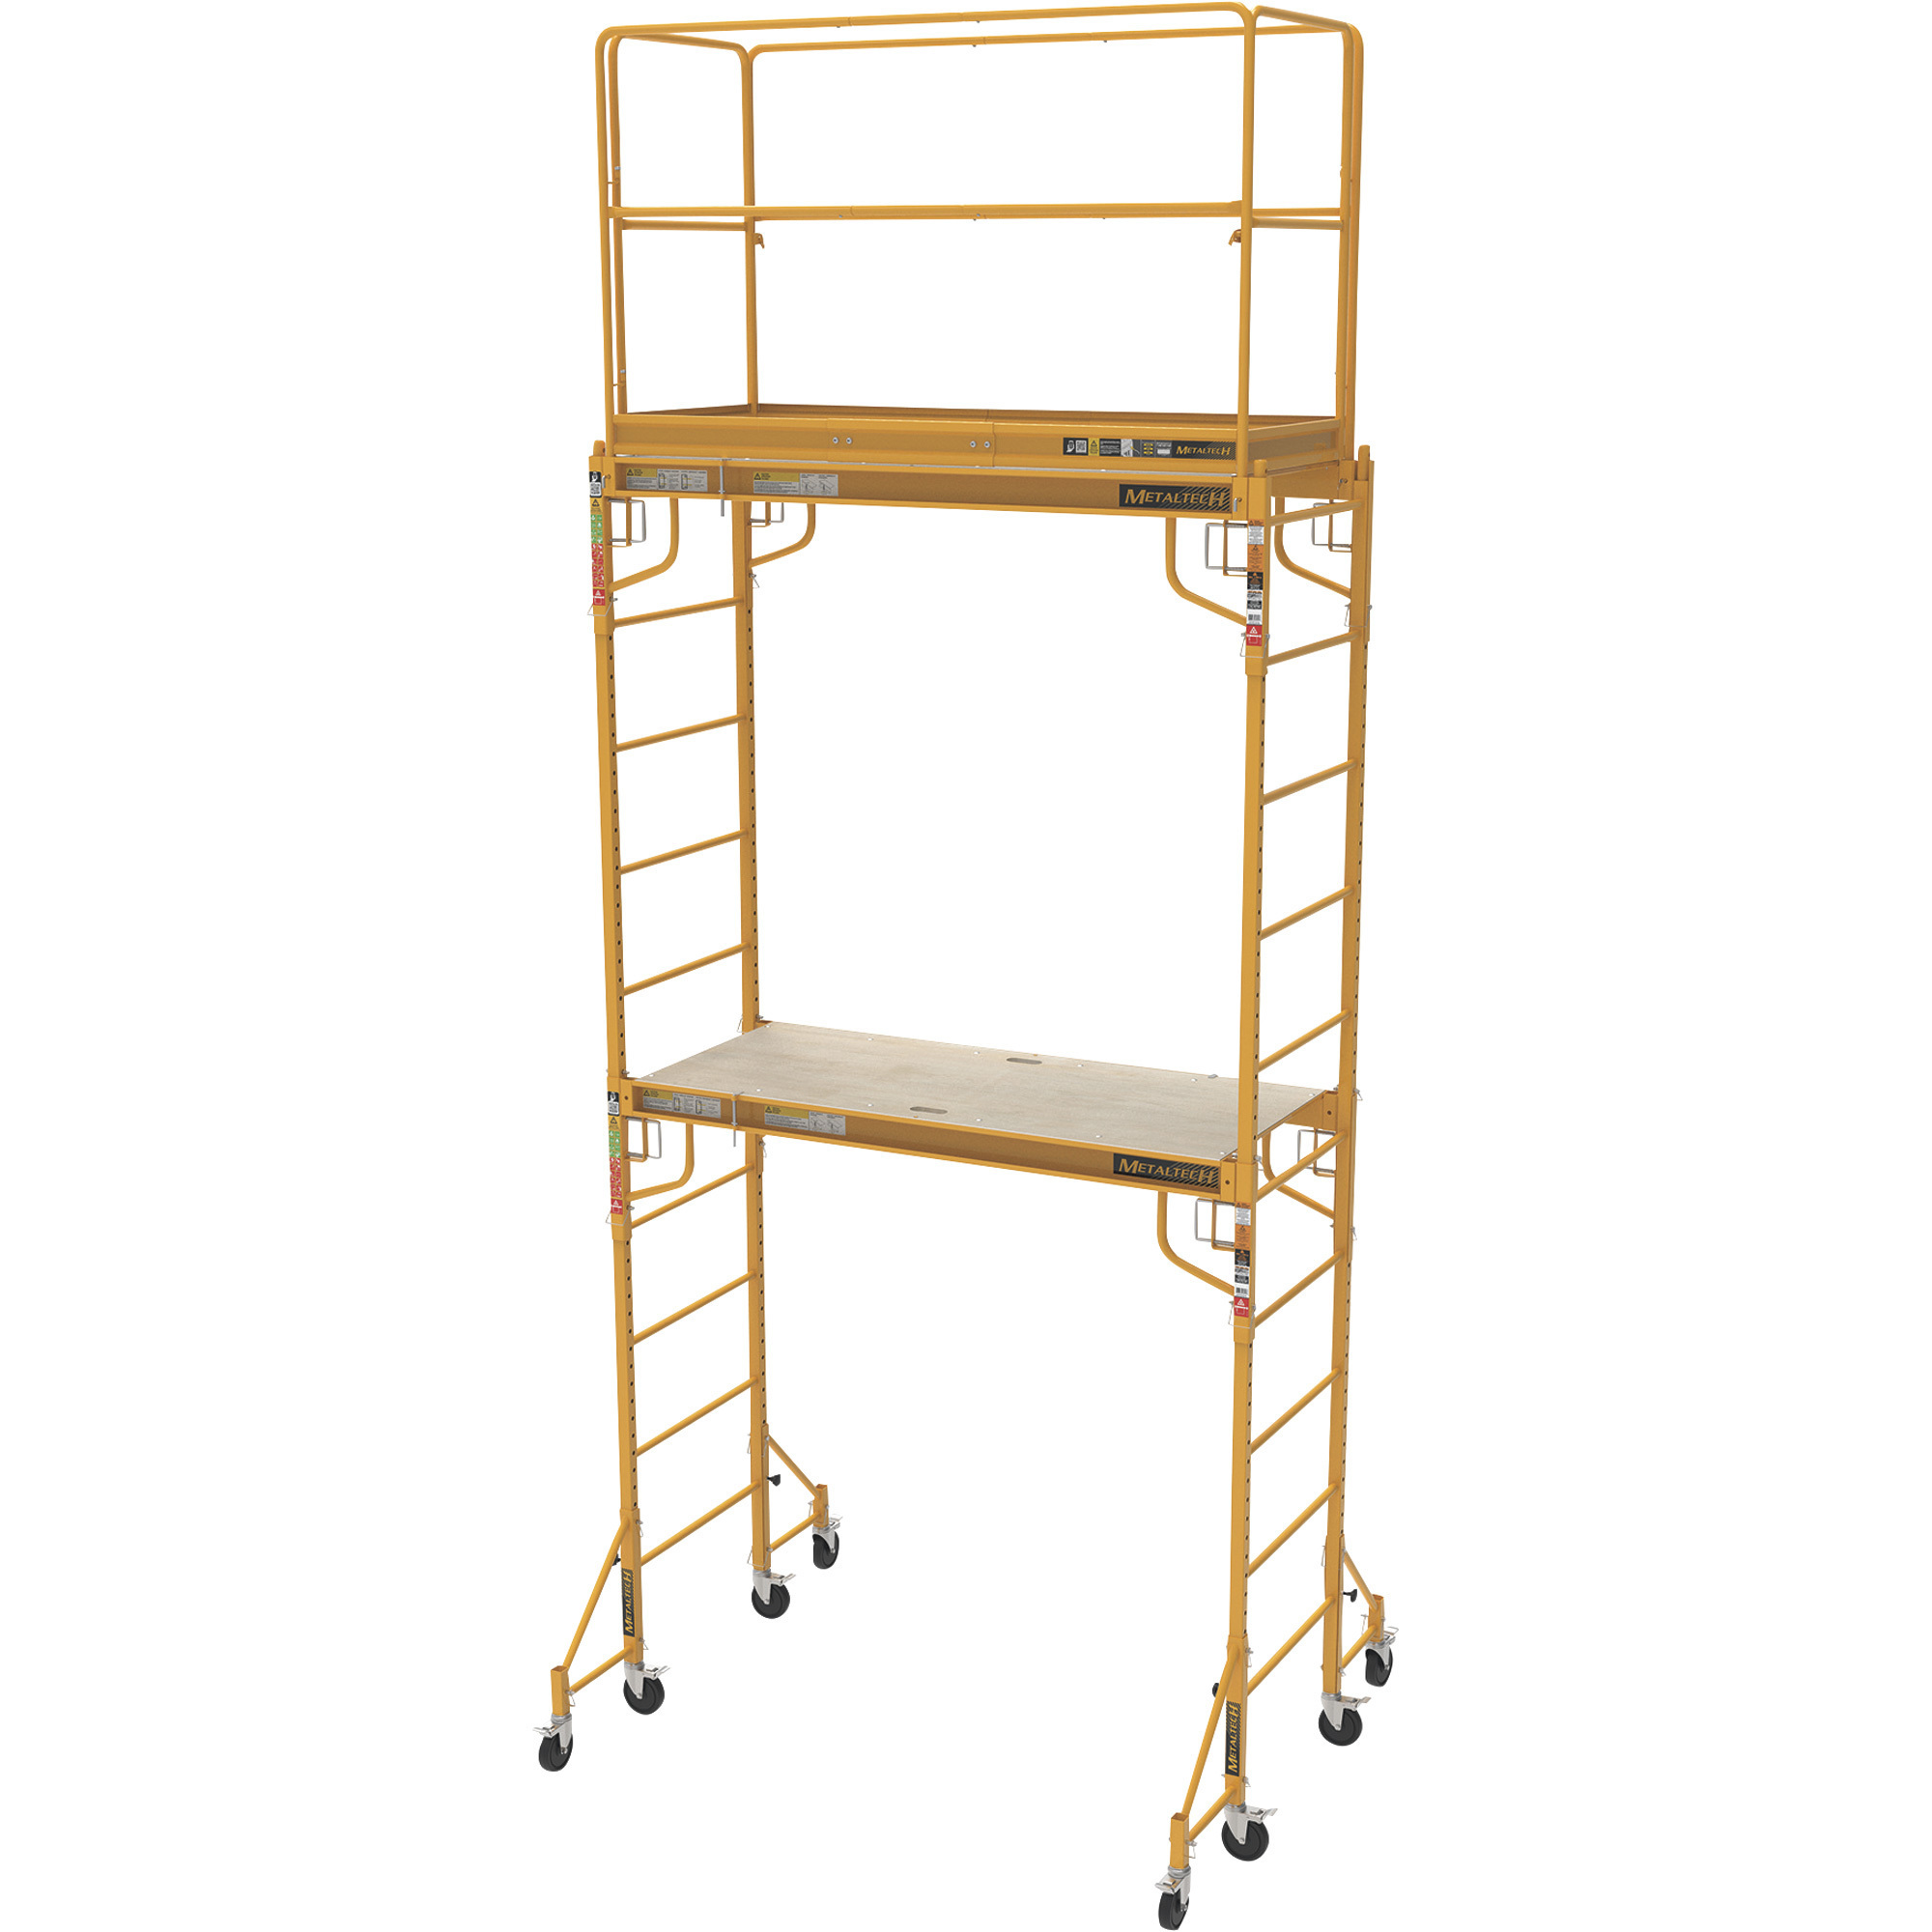 Metaltech Multi-Purpose Maxi Square Baker-Style Rolling Scaffold Tower Package, 12ft., 820-Lb. Capacity, Model I-TCISC